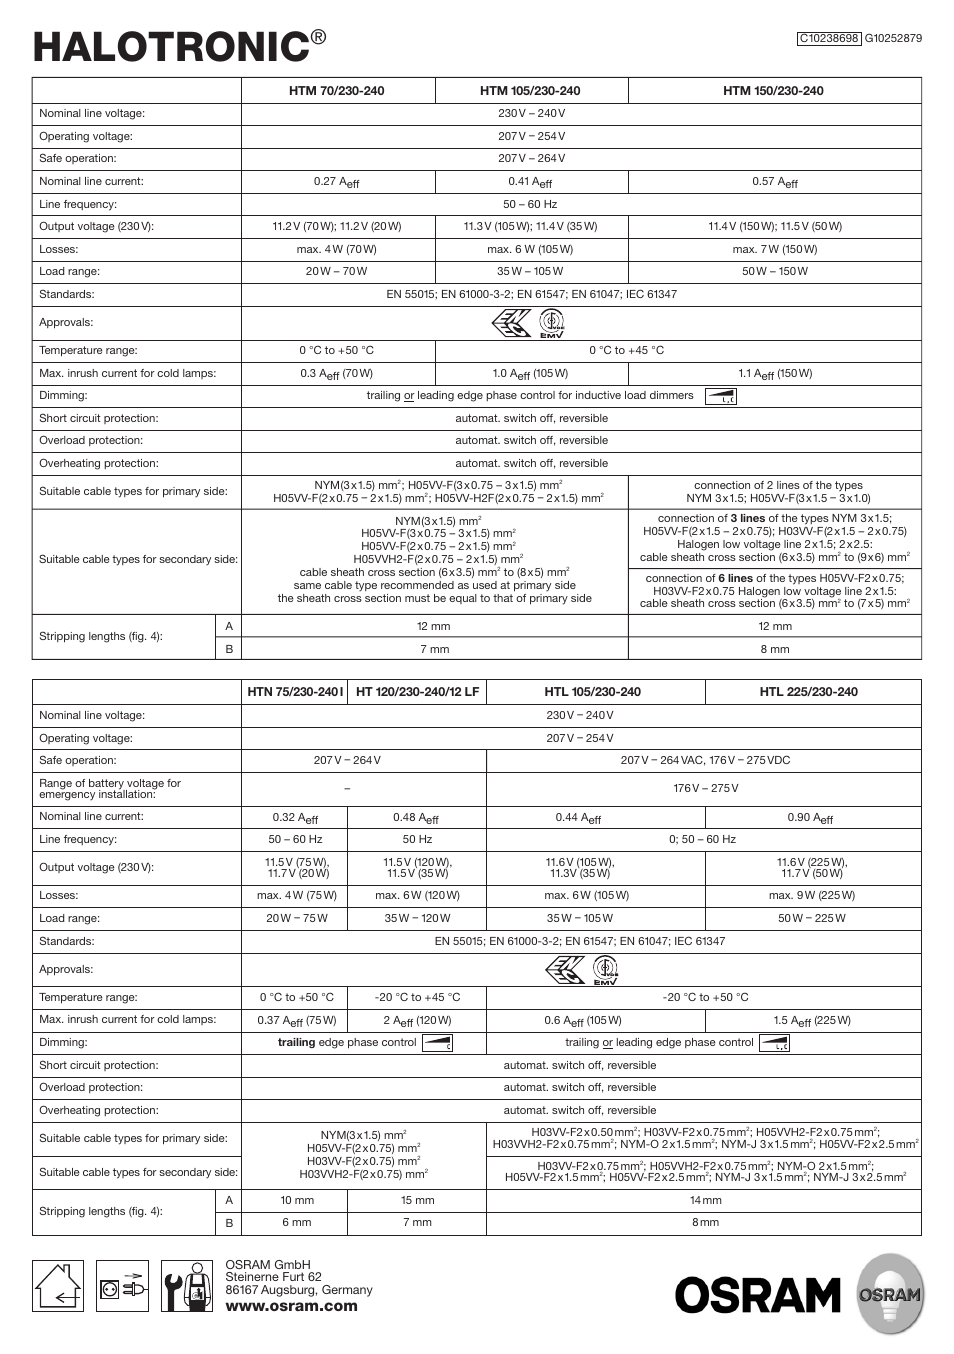 Halotronic | OSRAM HALOTRONIC-COMPACT – HTM, HTN User Manual | Page 2 / 2